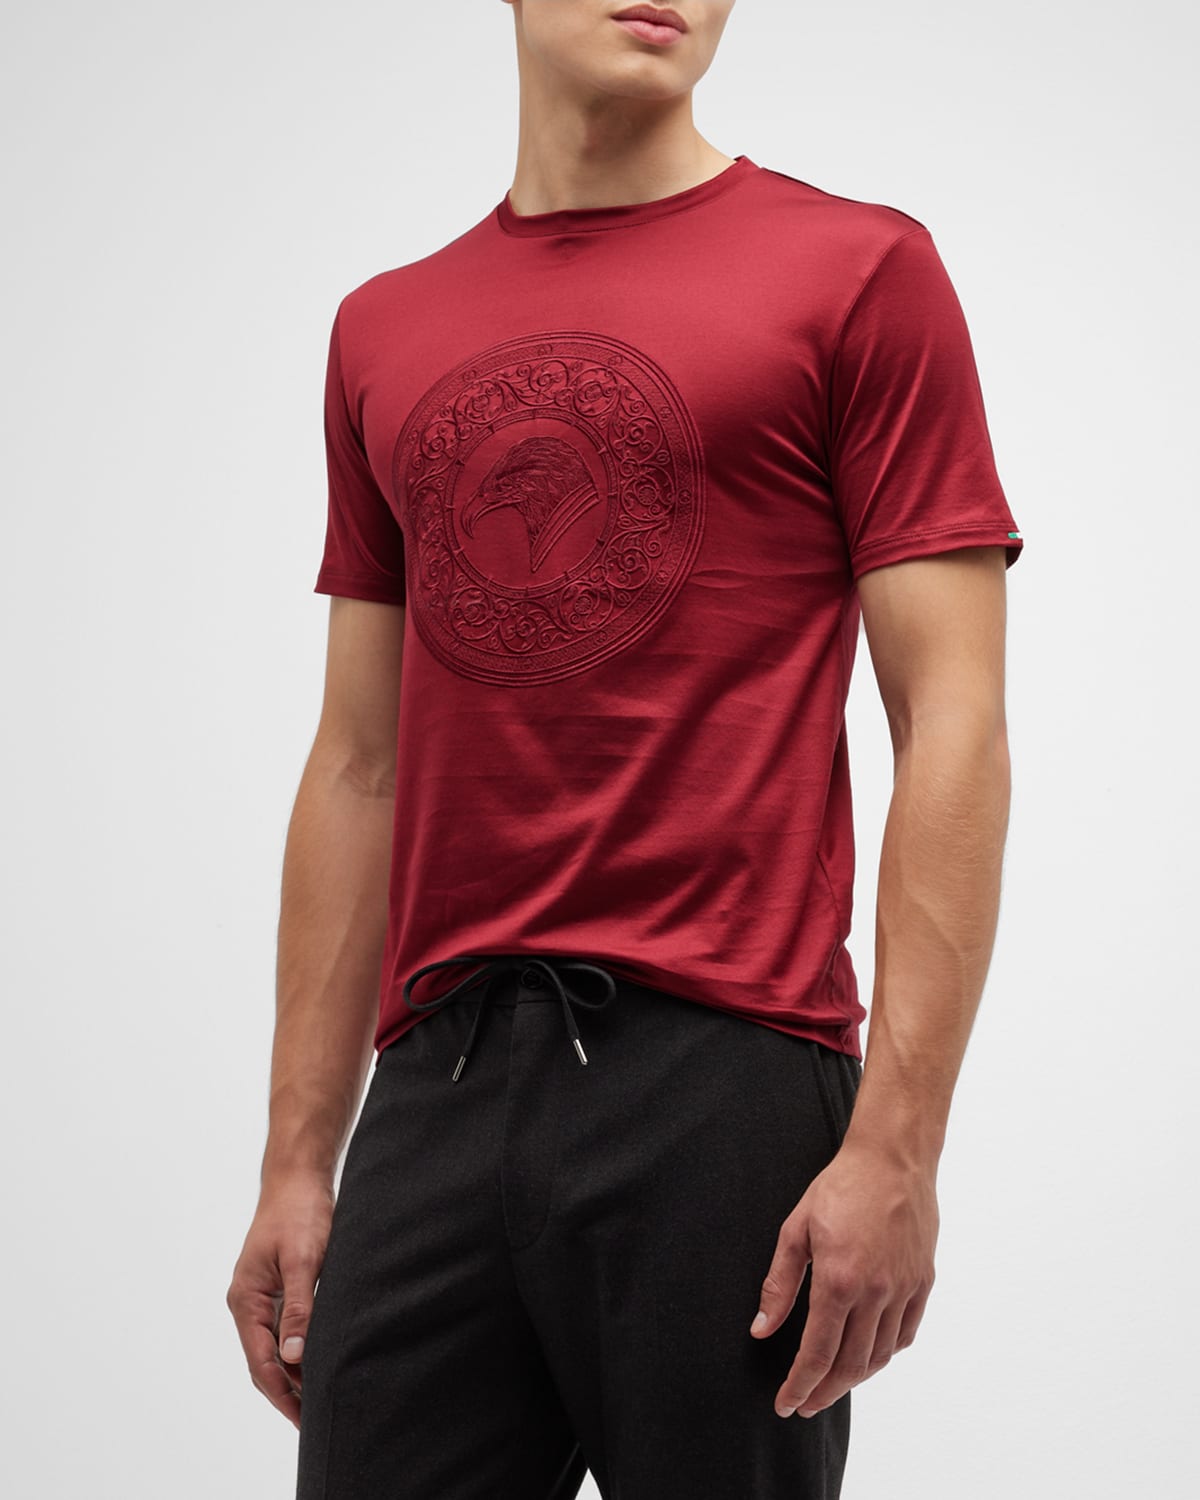 Men's Cotton-Modal Embroidered T-Shirt